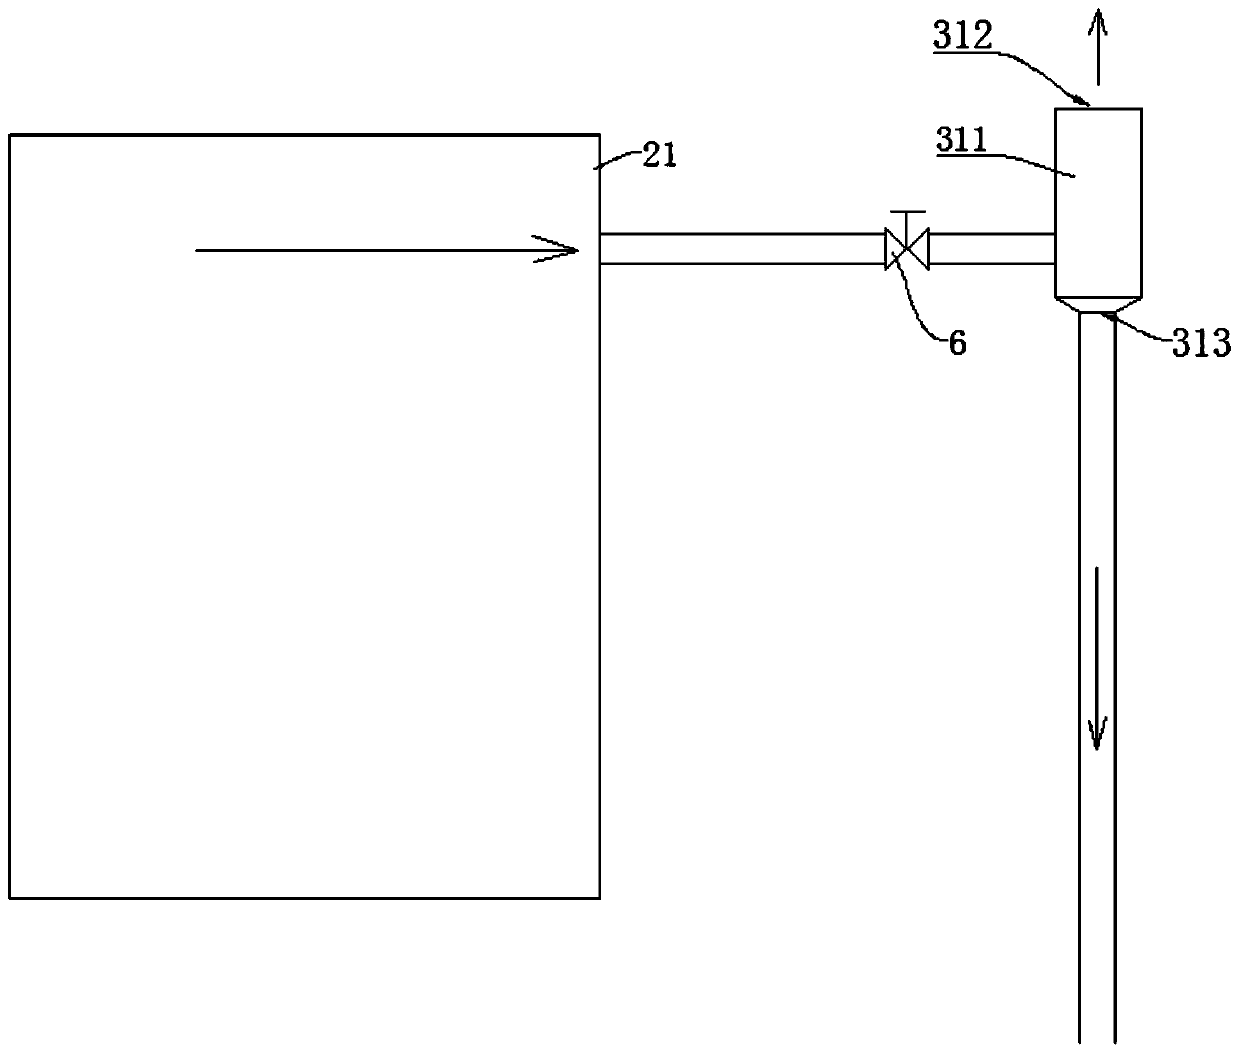 Draining system for brown-sugar continuous boiling tank